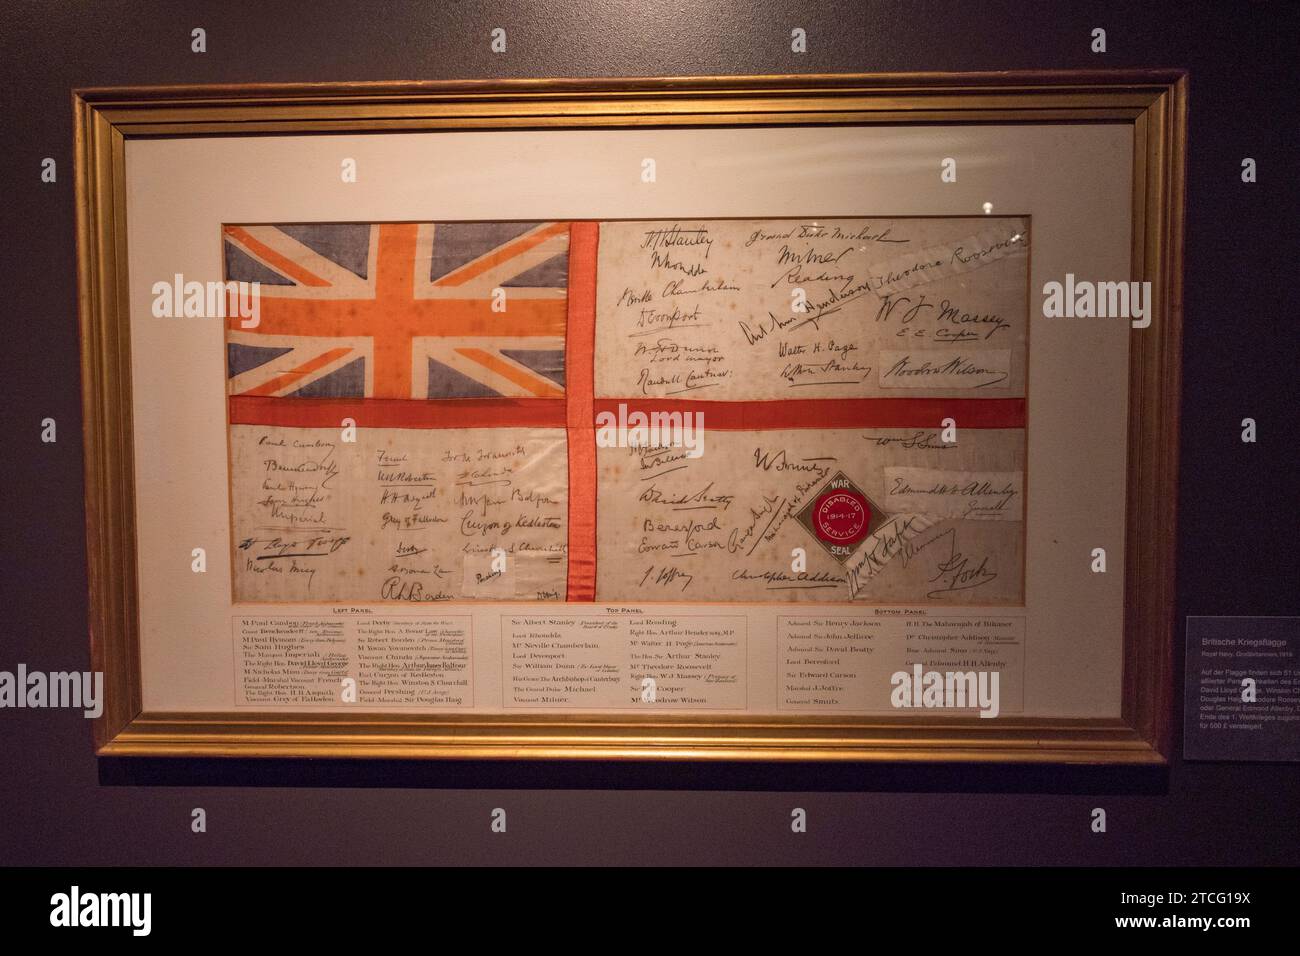 A British Royl Navy flag from WWI signed by many politicians and War personnel in the International Maritime Museum in HafenCity, Hamburg, Germany. Stock Photo